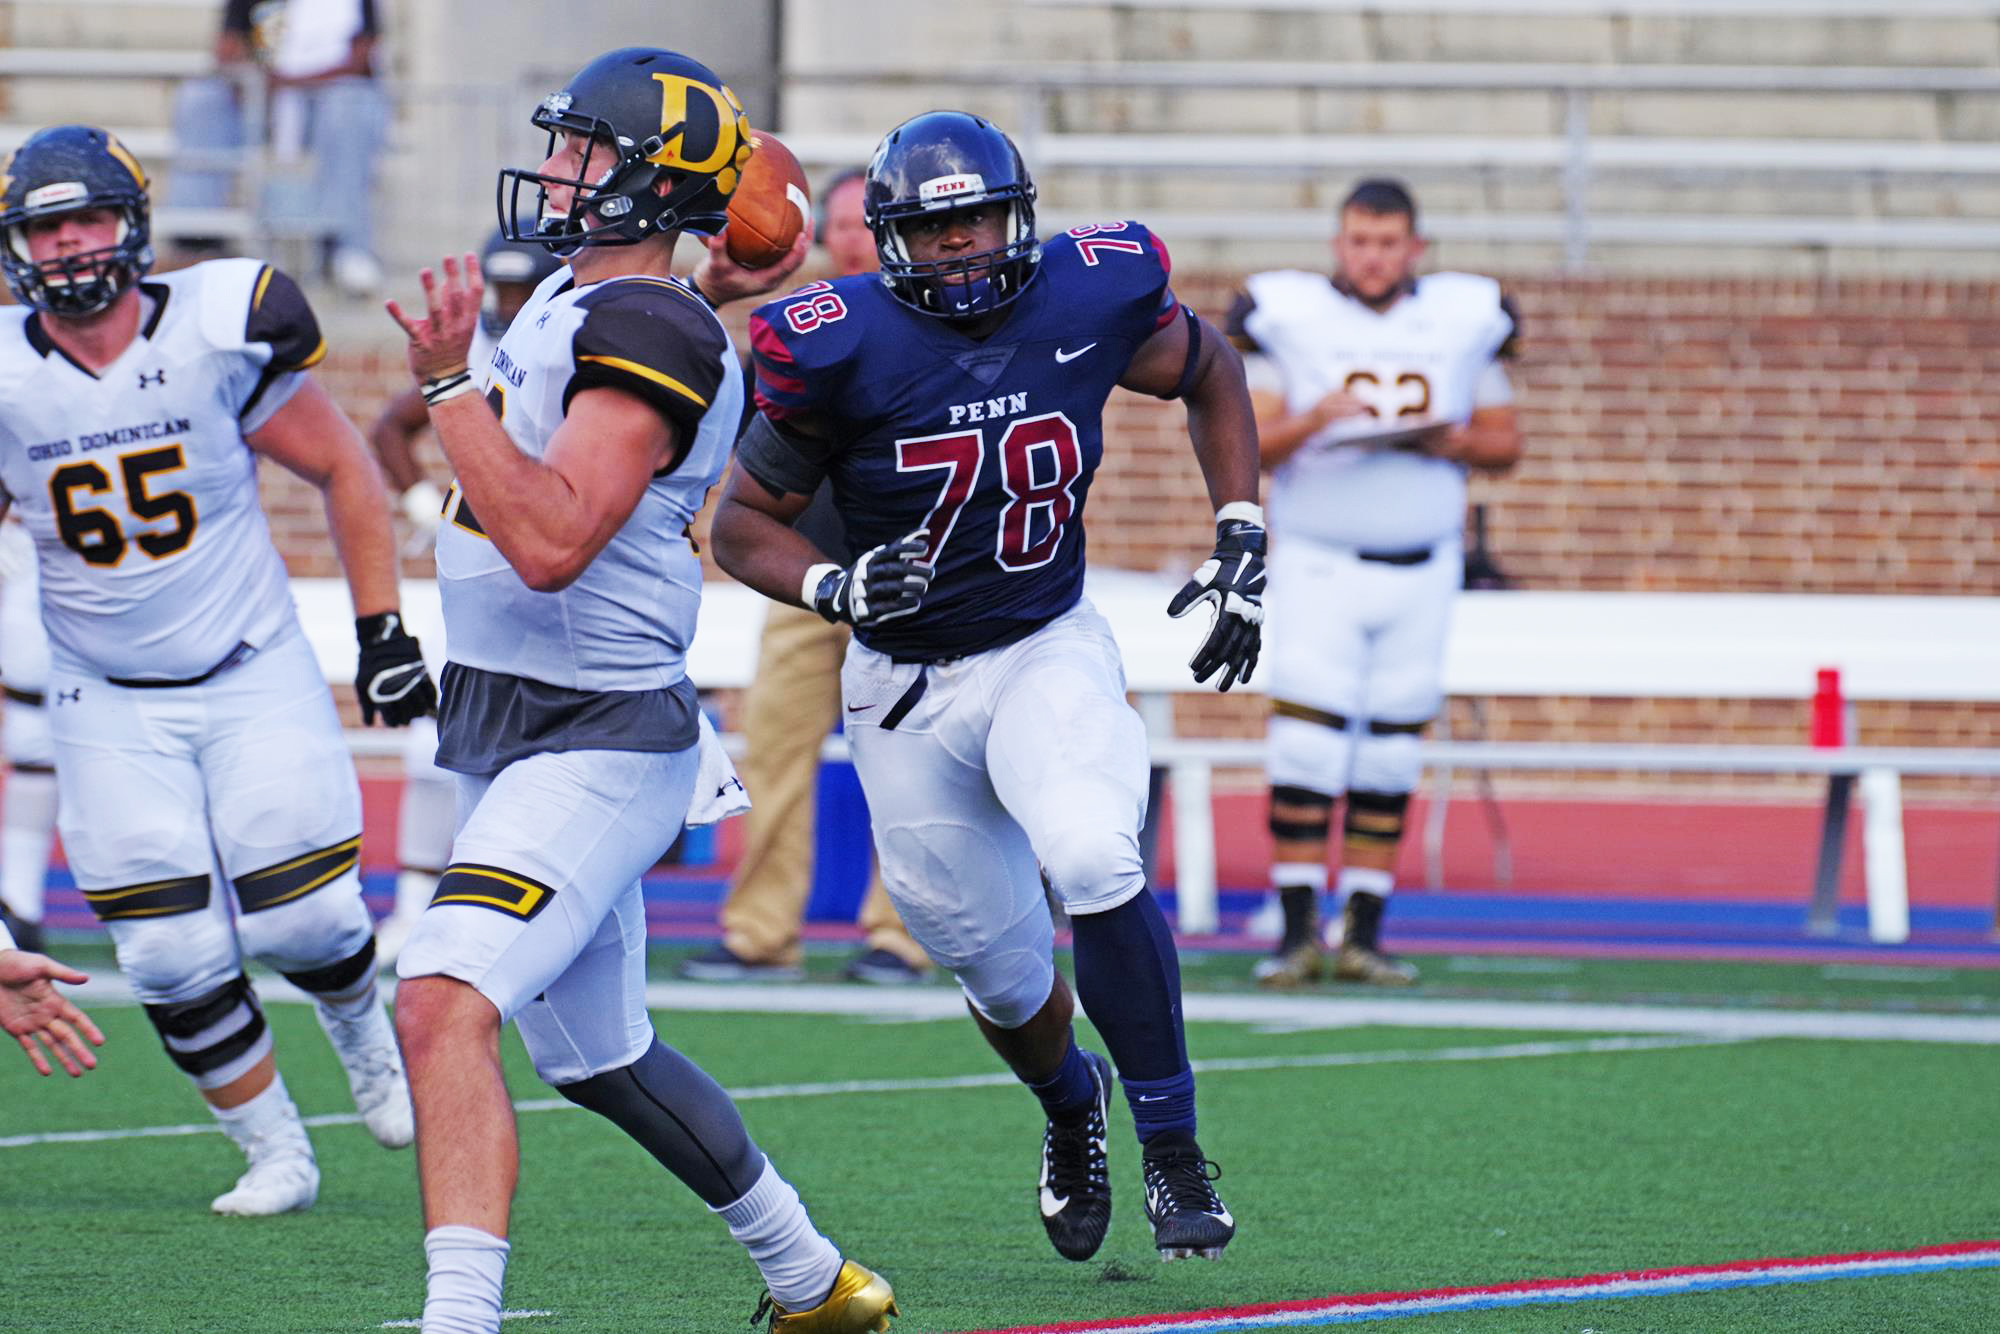 Prince Emili rushes the quarterback during a game at Franklin Field.